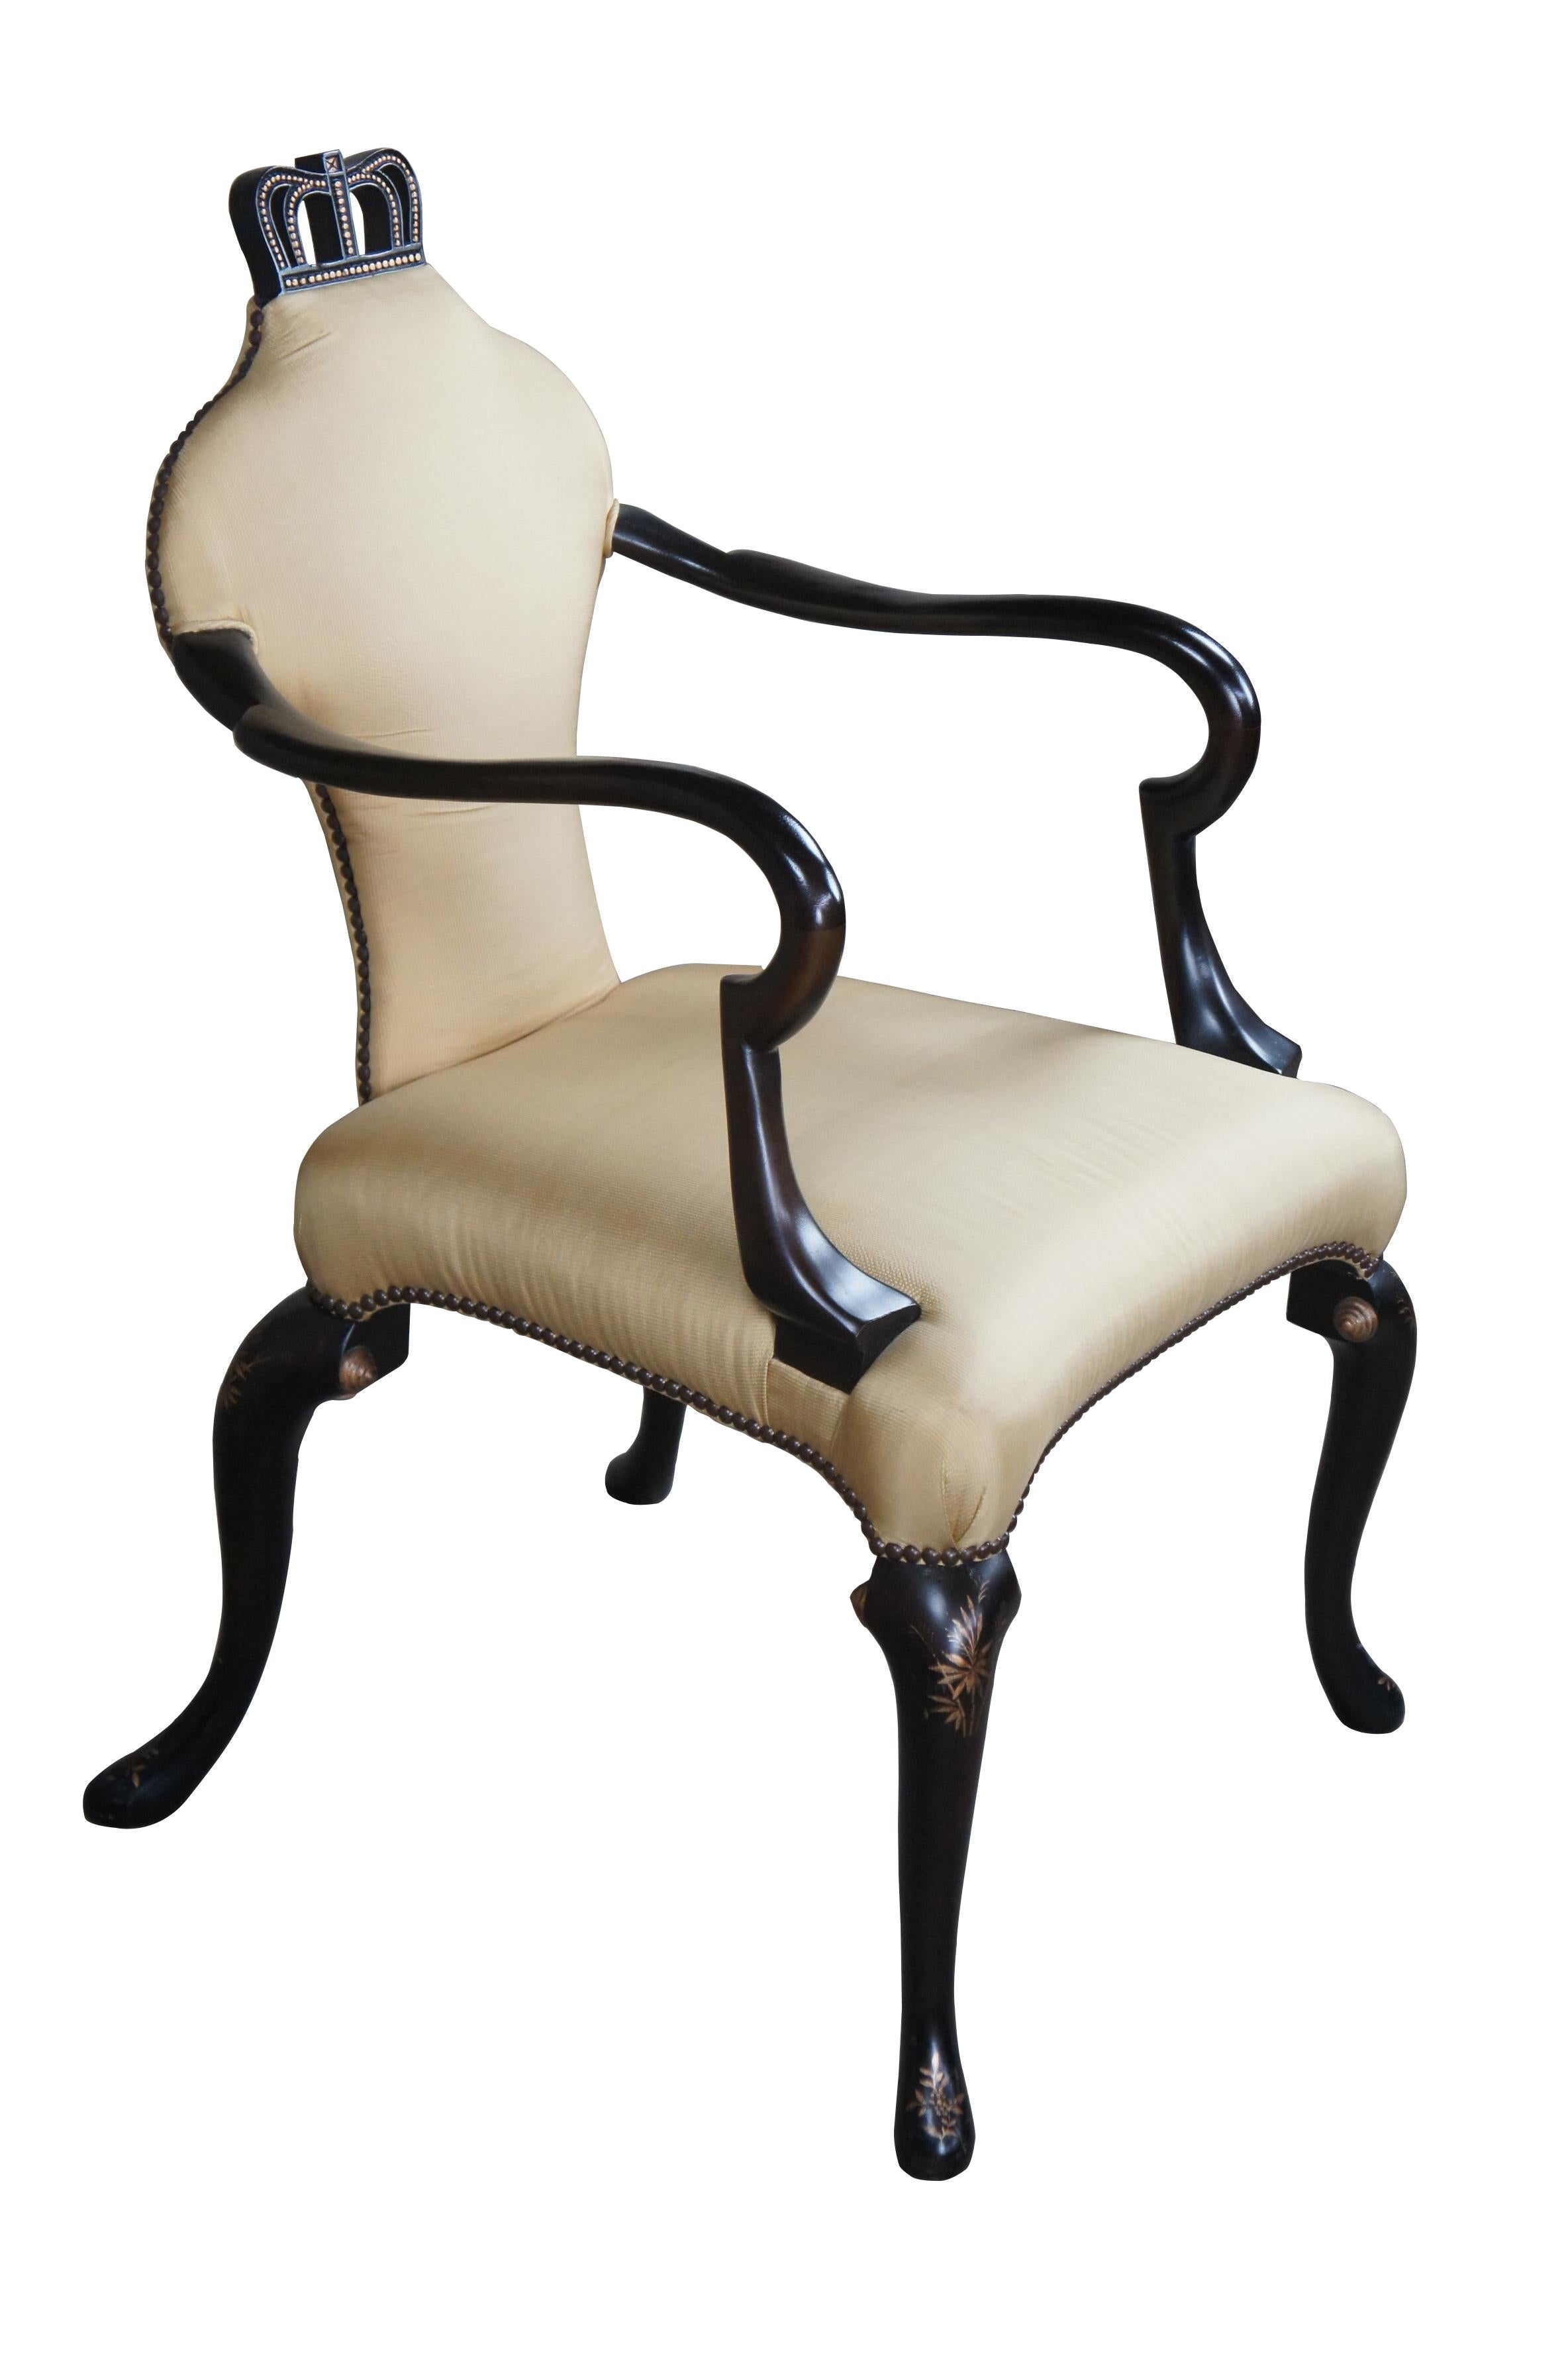 A Queen Anne Chair with an upholstered back in lieu of a splat. Elongated shepherd's crook (gooseneck) arm. Distinctive cabriole legs, with unusual splayed back legs. Nailhead trim. This chair owes to Lord Middleton and the family's home at Wollaton